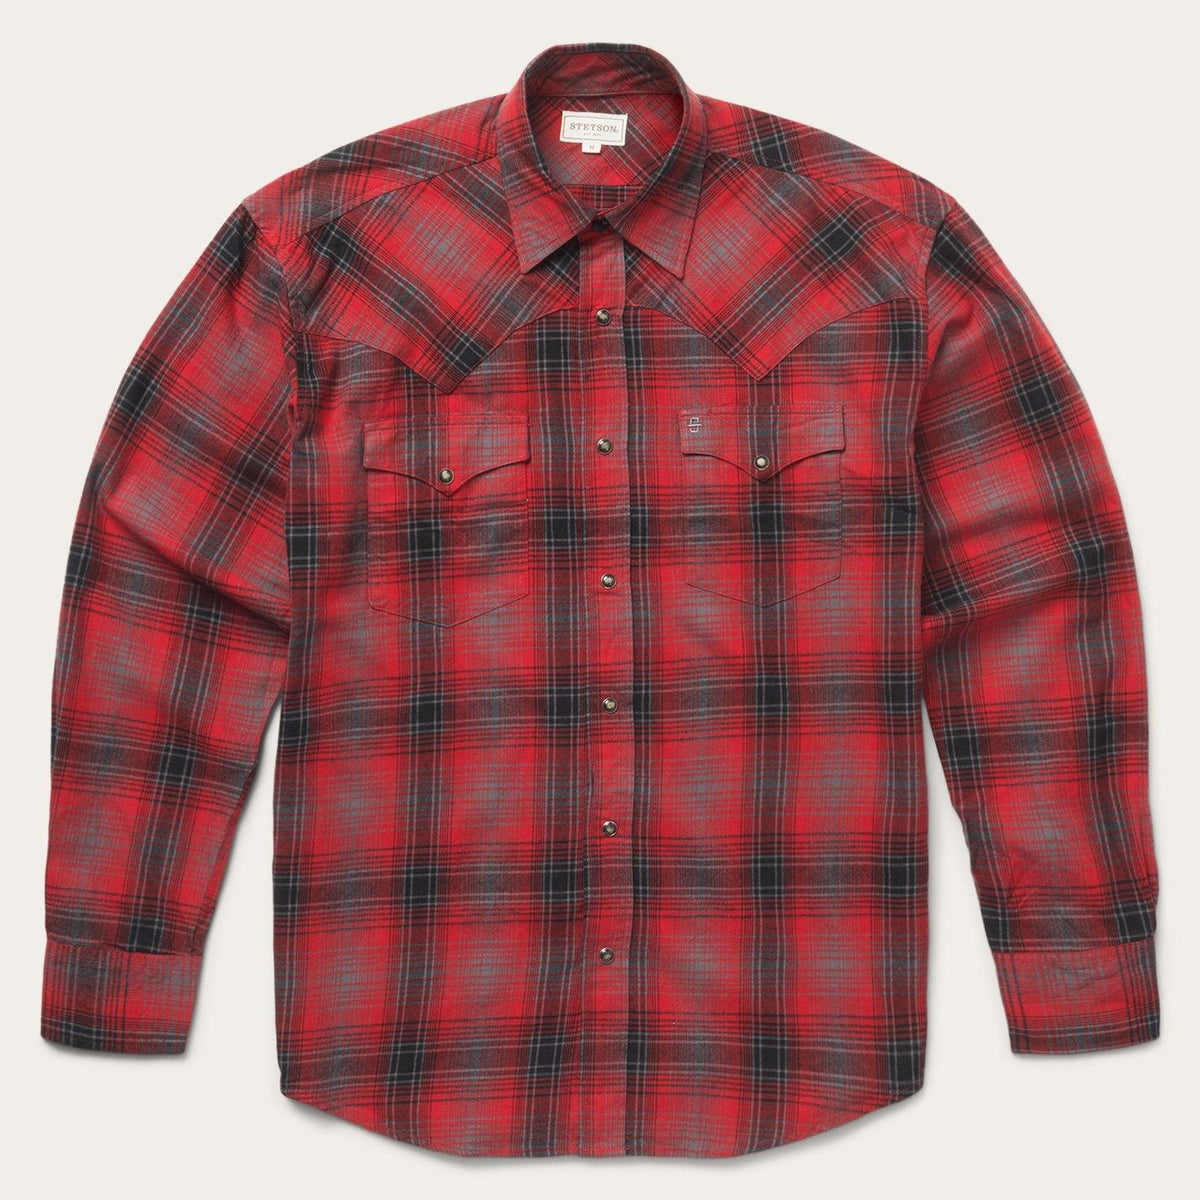 Stetson Classic Flannel Western Shirt in Red Plaid - Flyclothing LLC